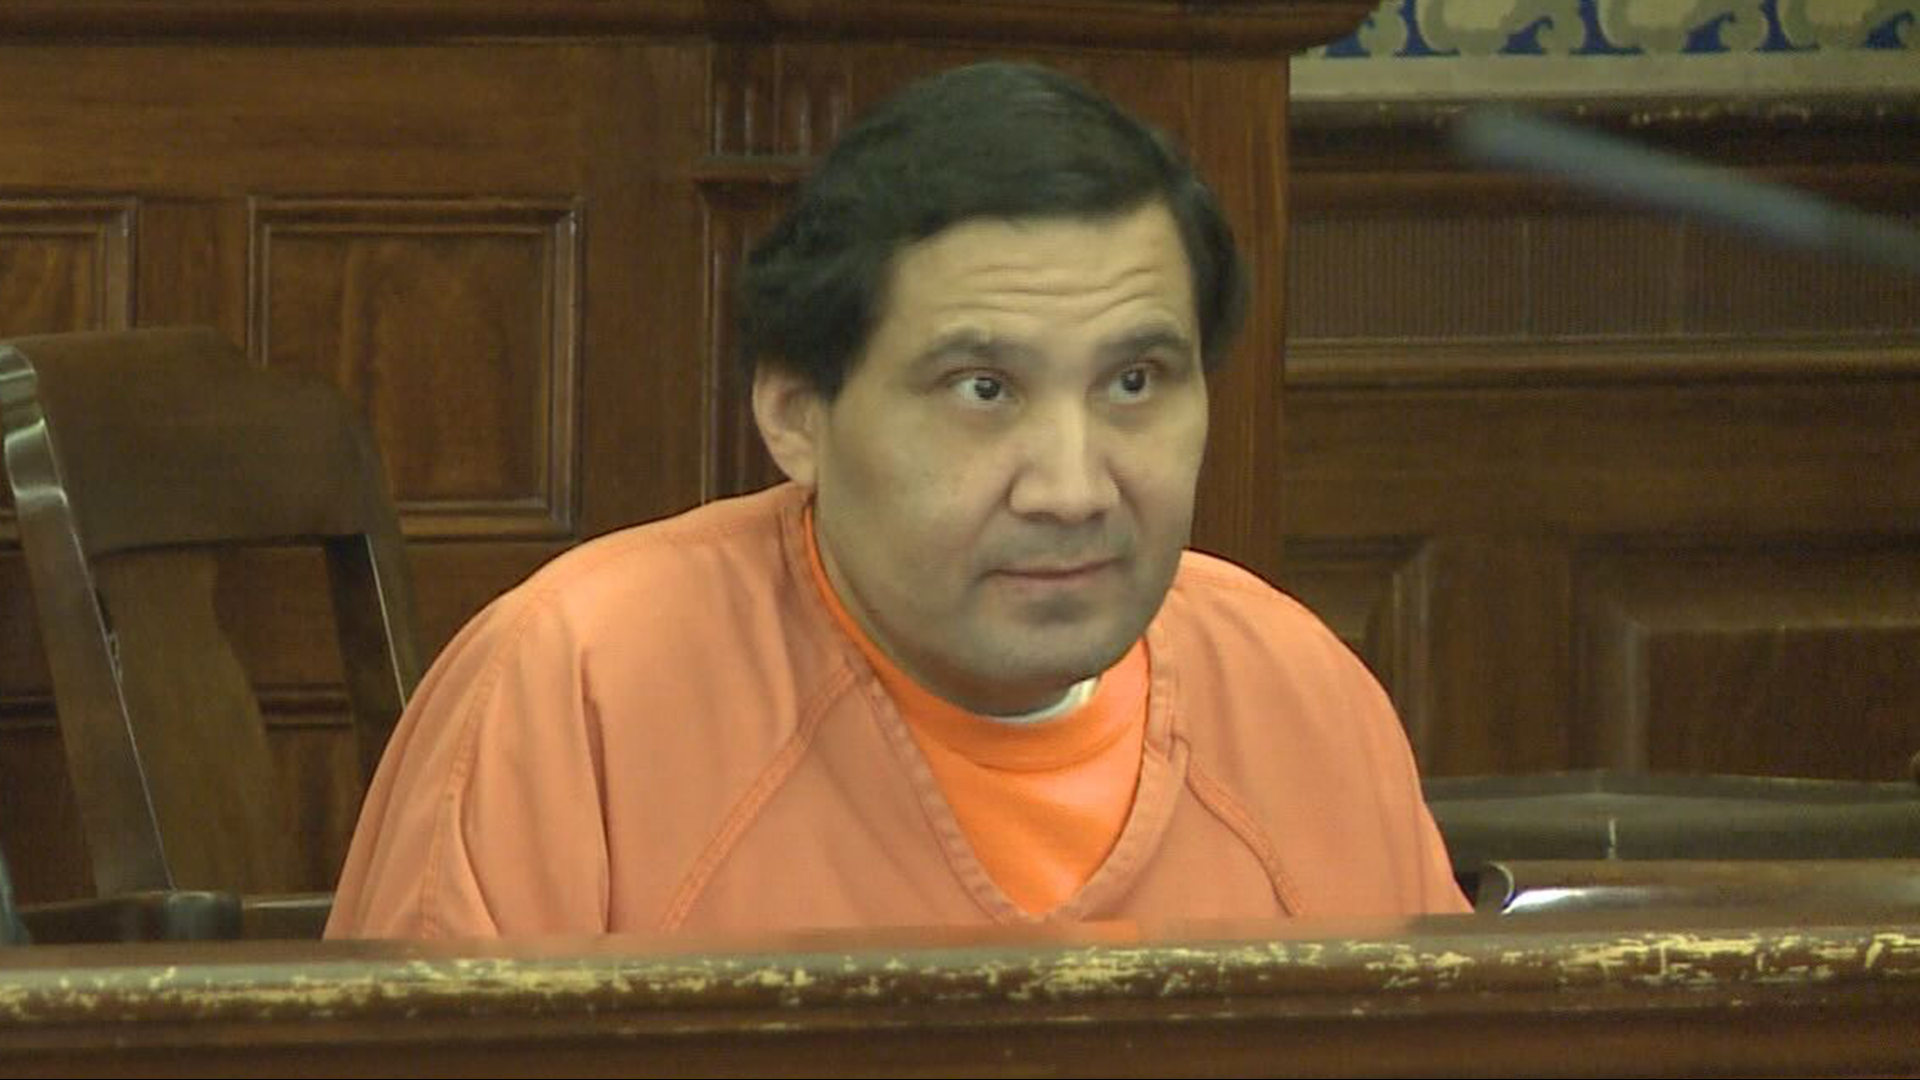 Lawyers for Julio Carrillo say he is remorseful for the beating death of Marissa Kennedy.